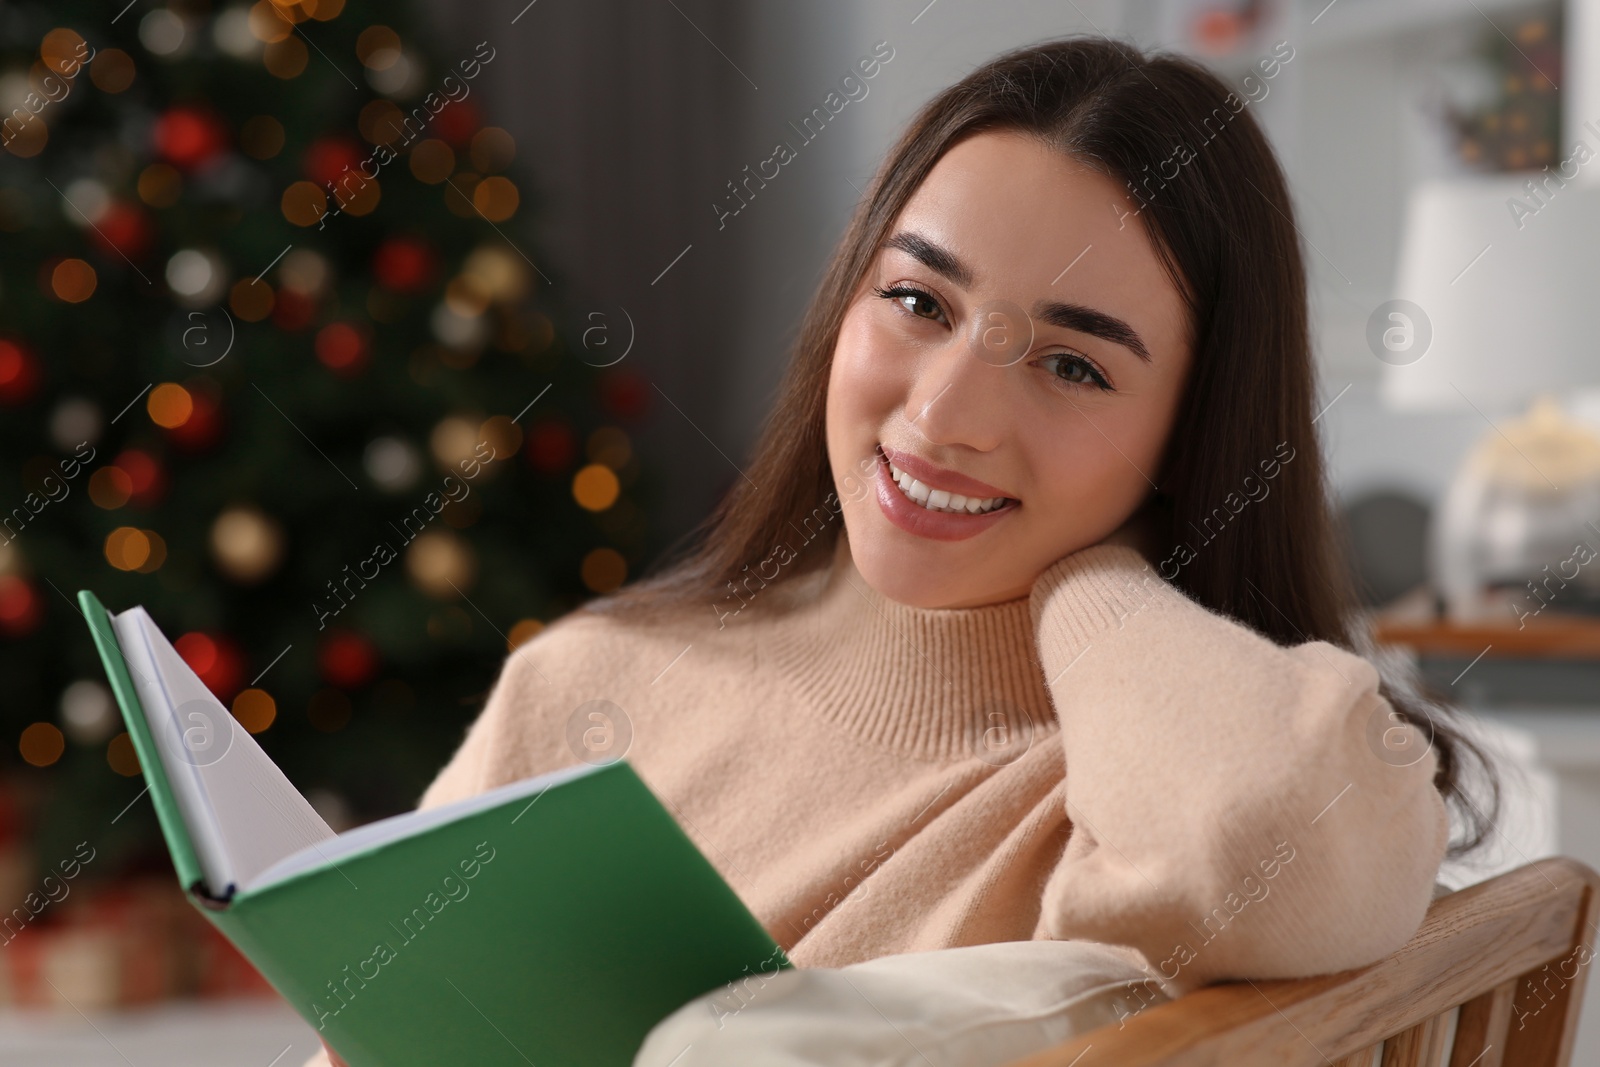 Photo of Christmas mood. Portrait of smiling woman with book indoors